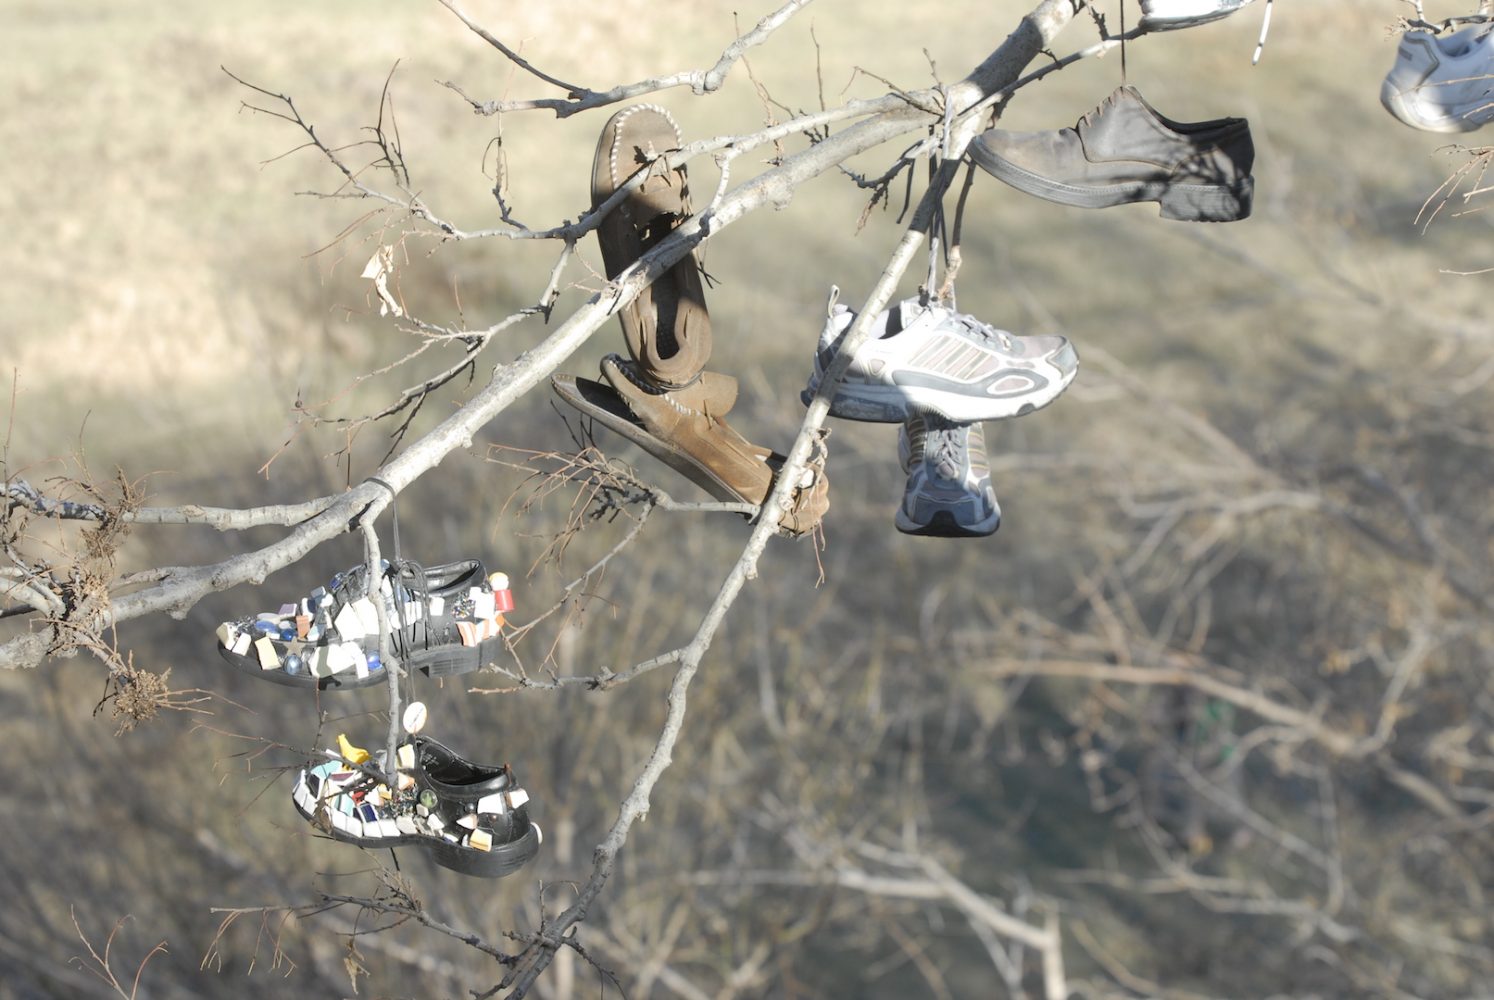 Hundreds of shoes hang from the branches of a tree.